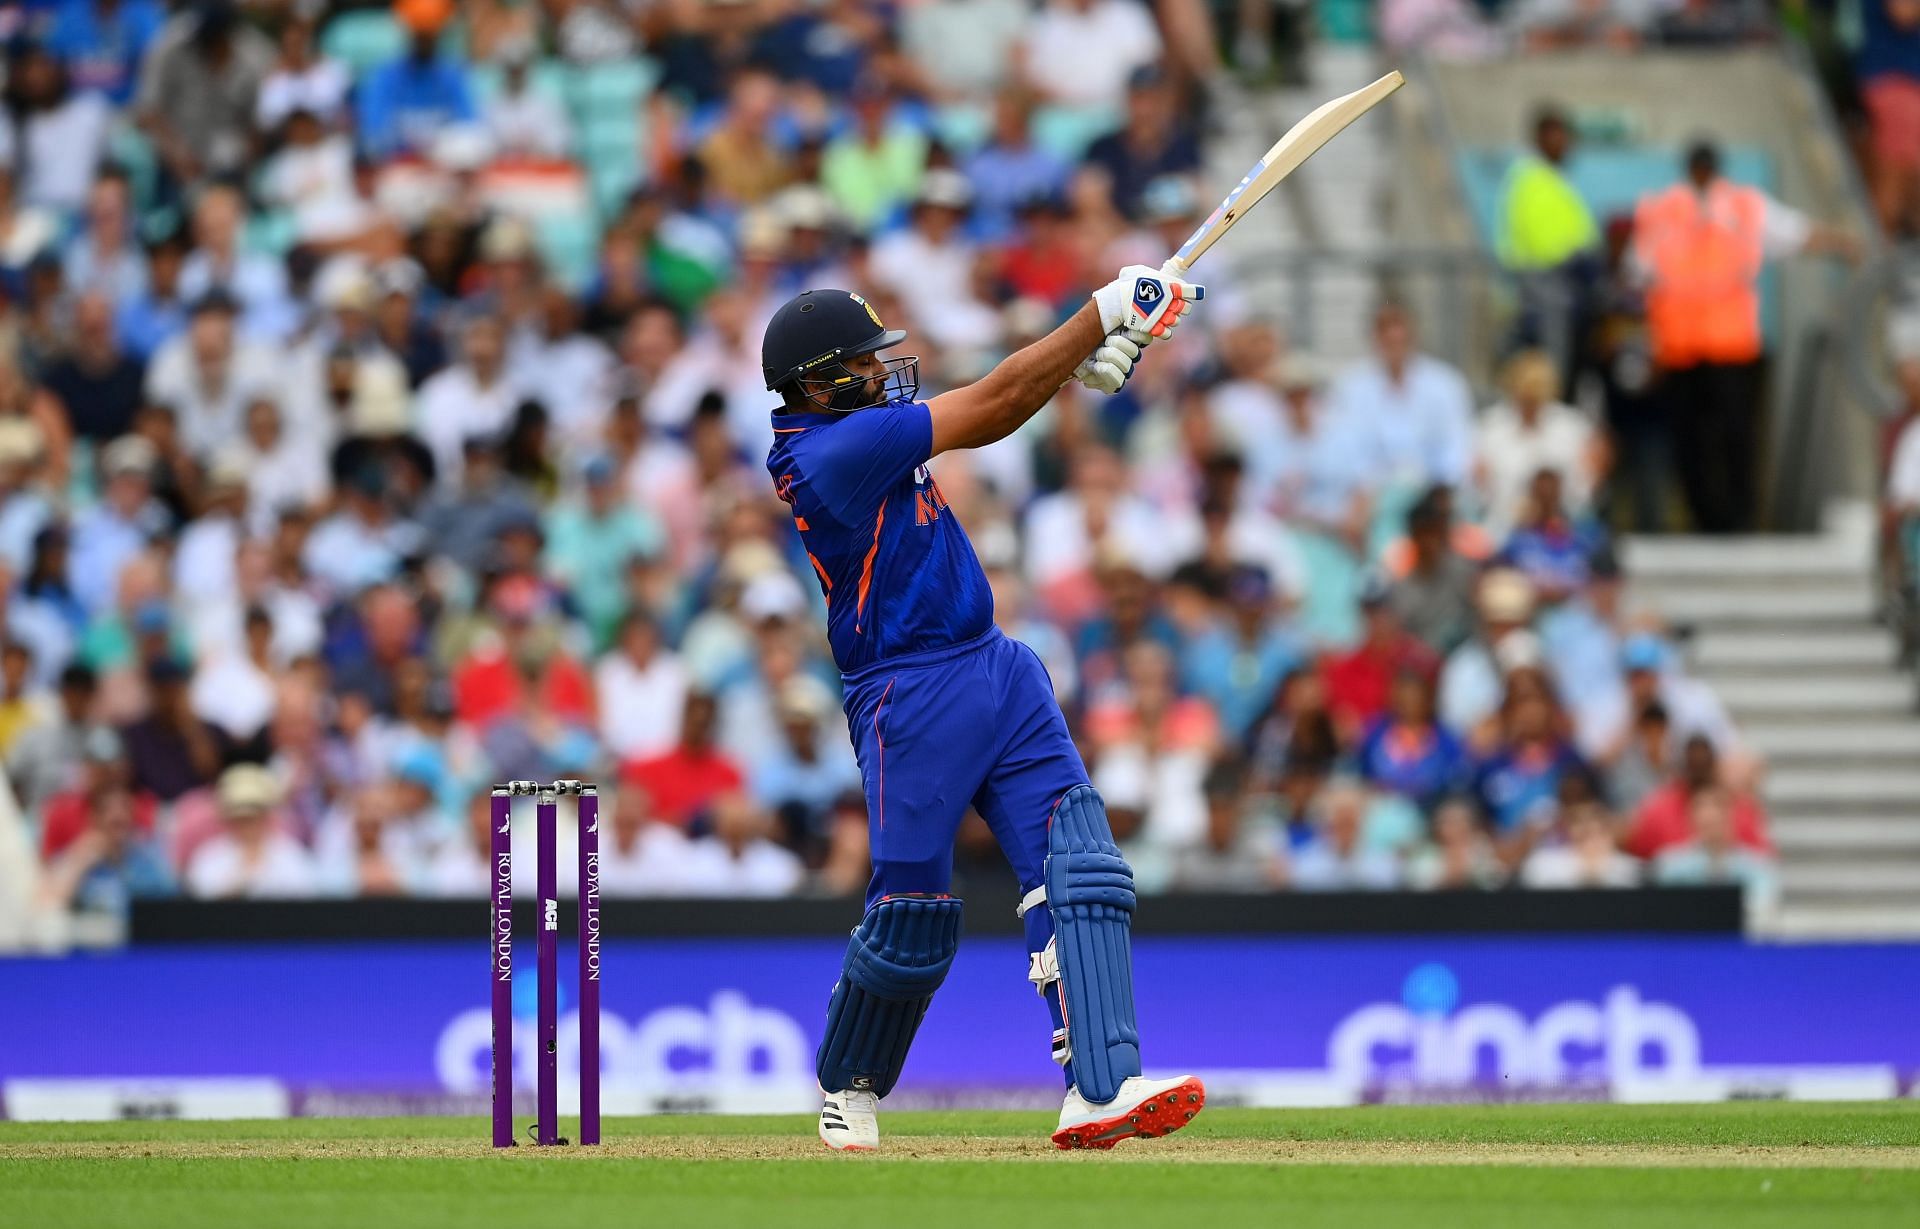 England v India - 1st Royal London Series One Day International (Image Courtesy: Getty Images)